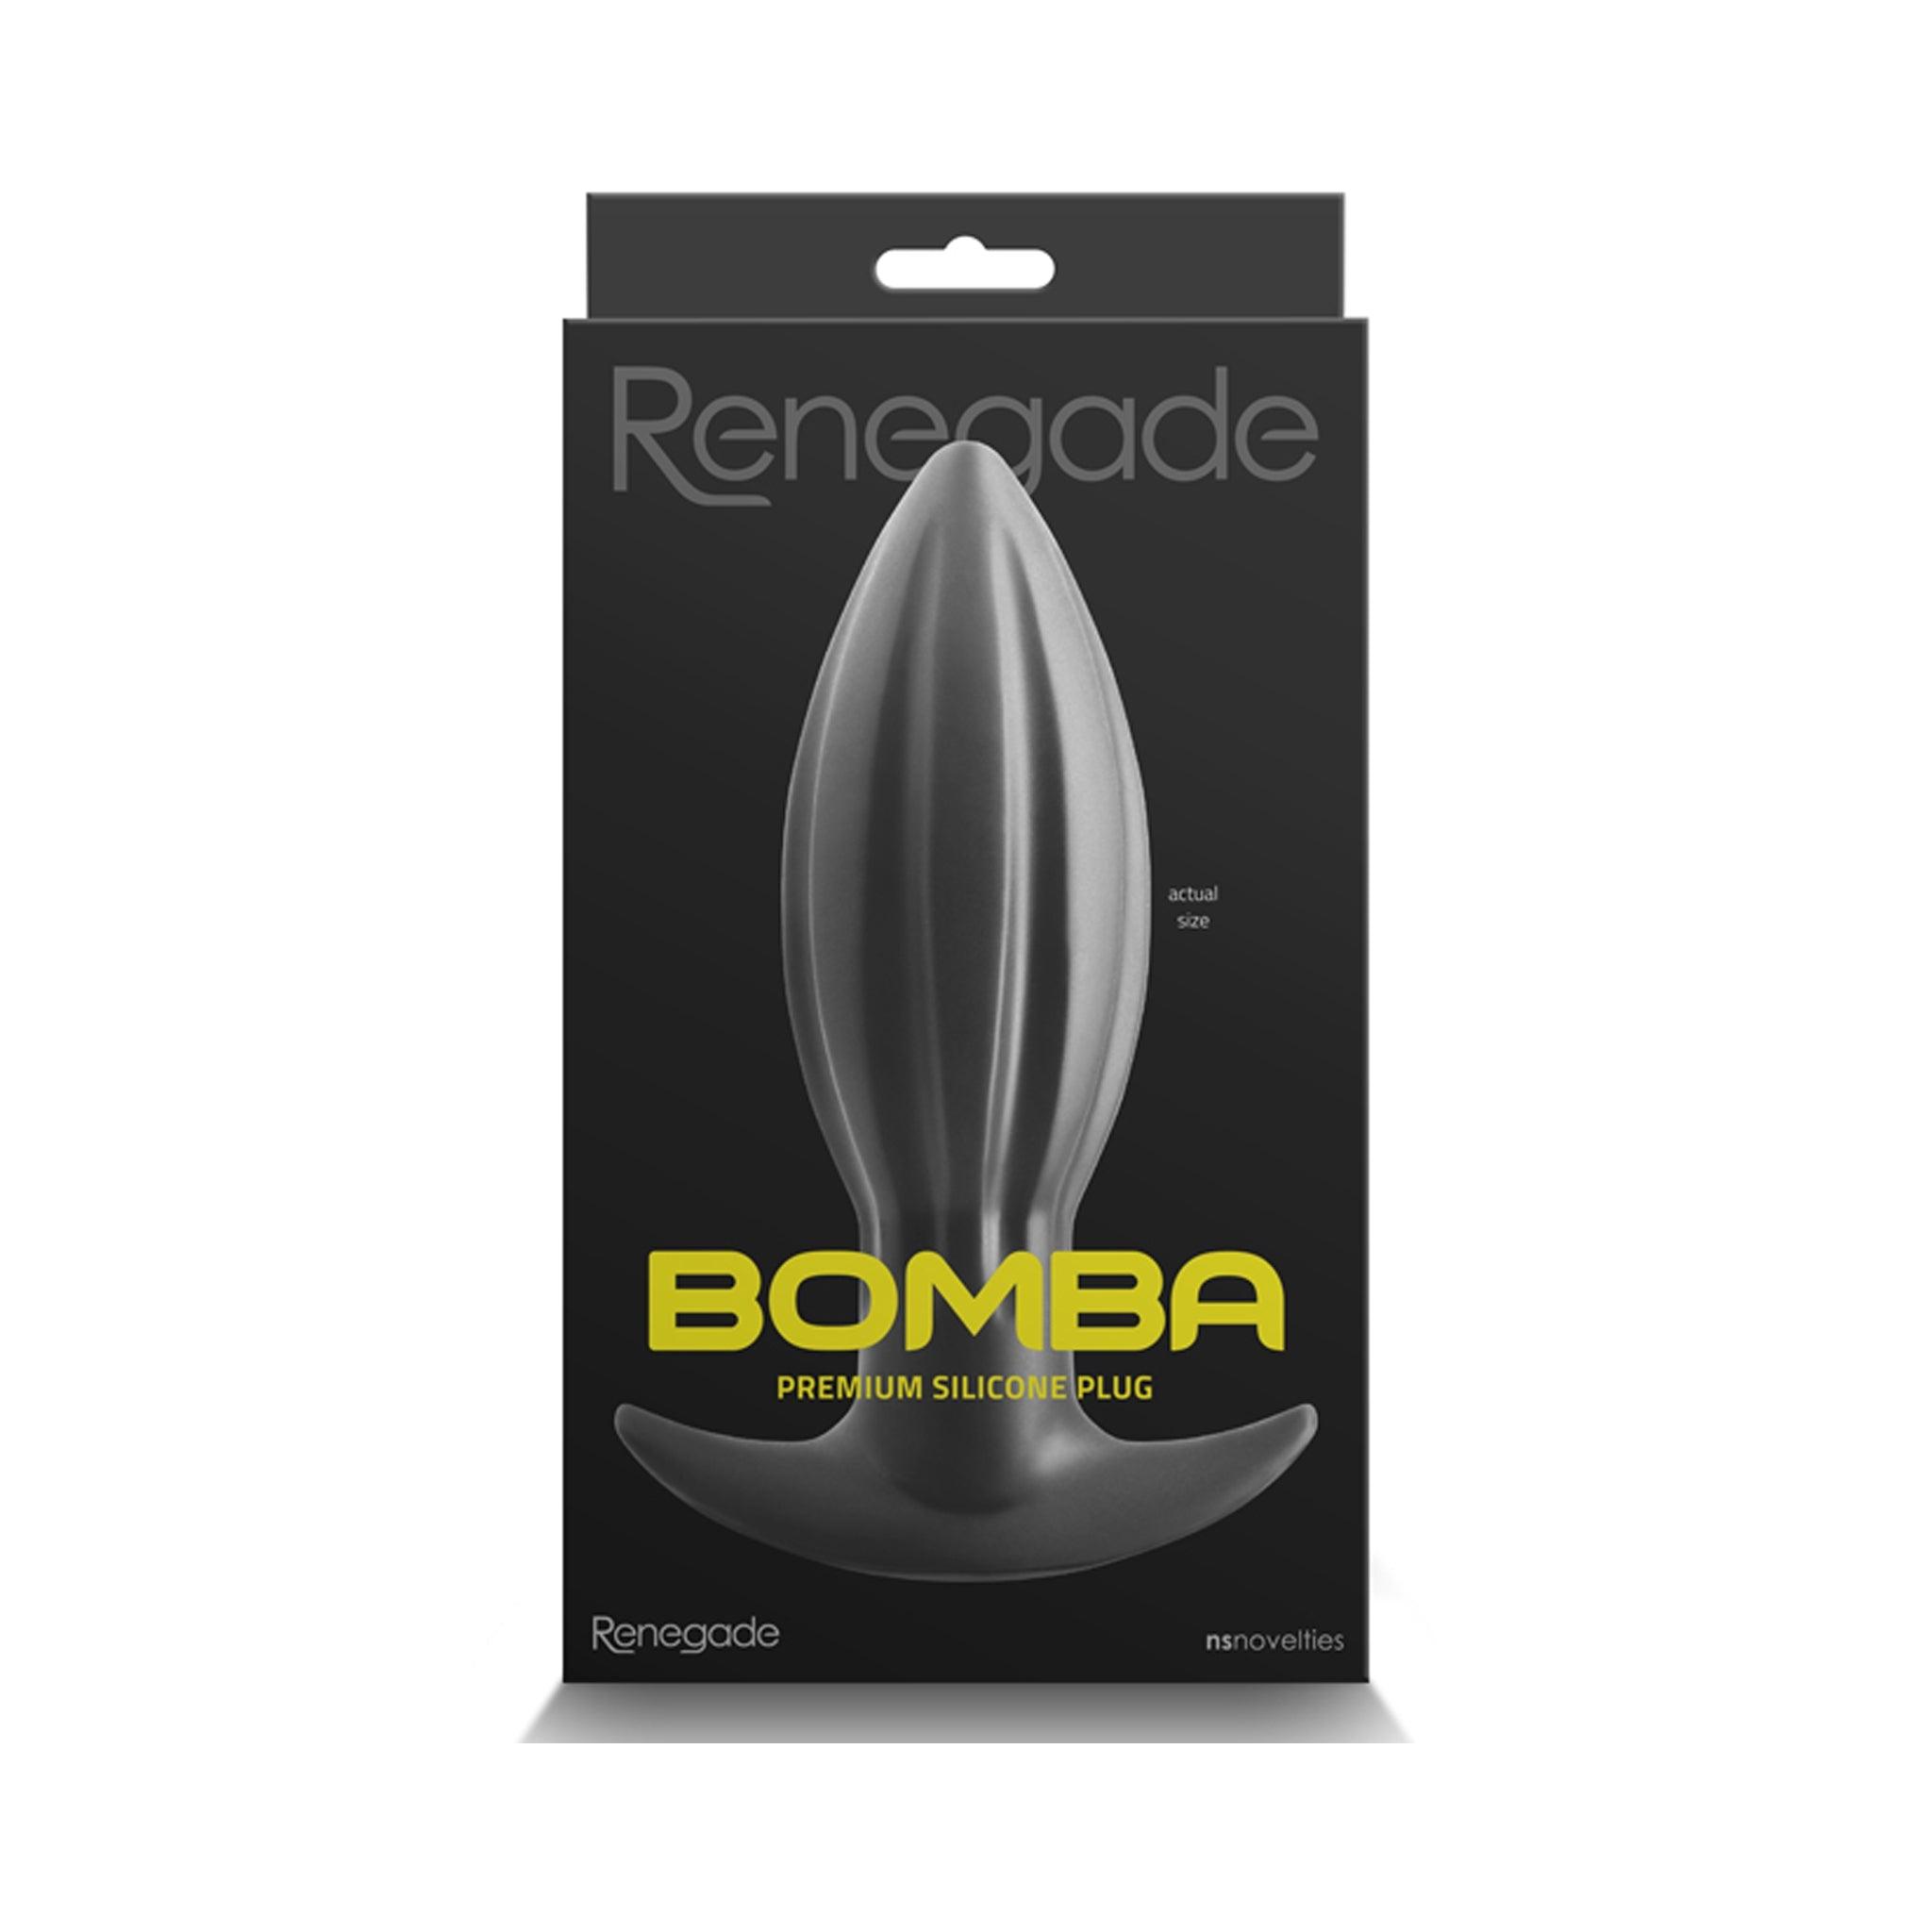 Renegade Bomba Premium Super Soft Silicone Plugs (3 sizes to Choose From) - CheapLubes.com